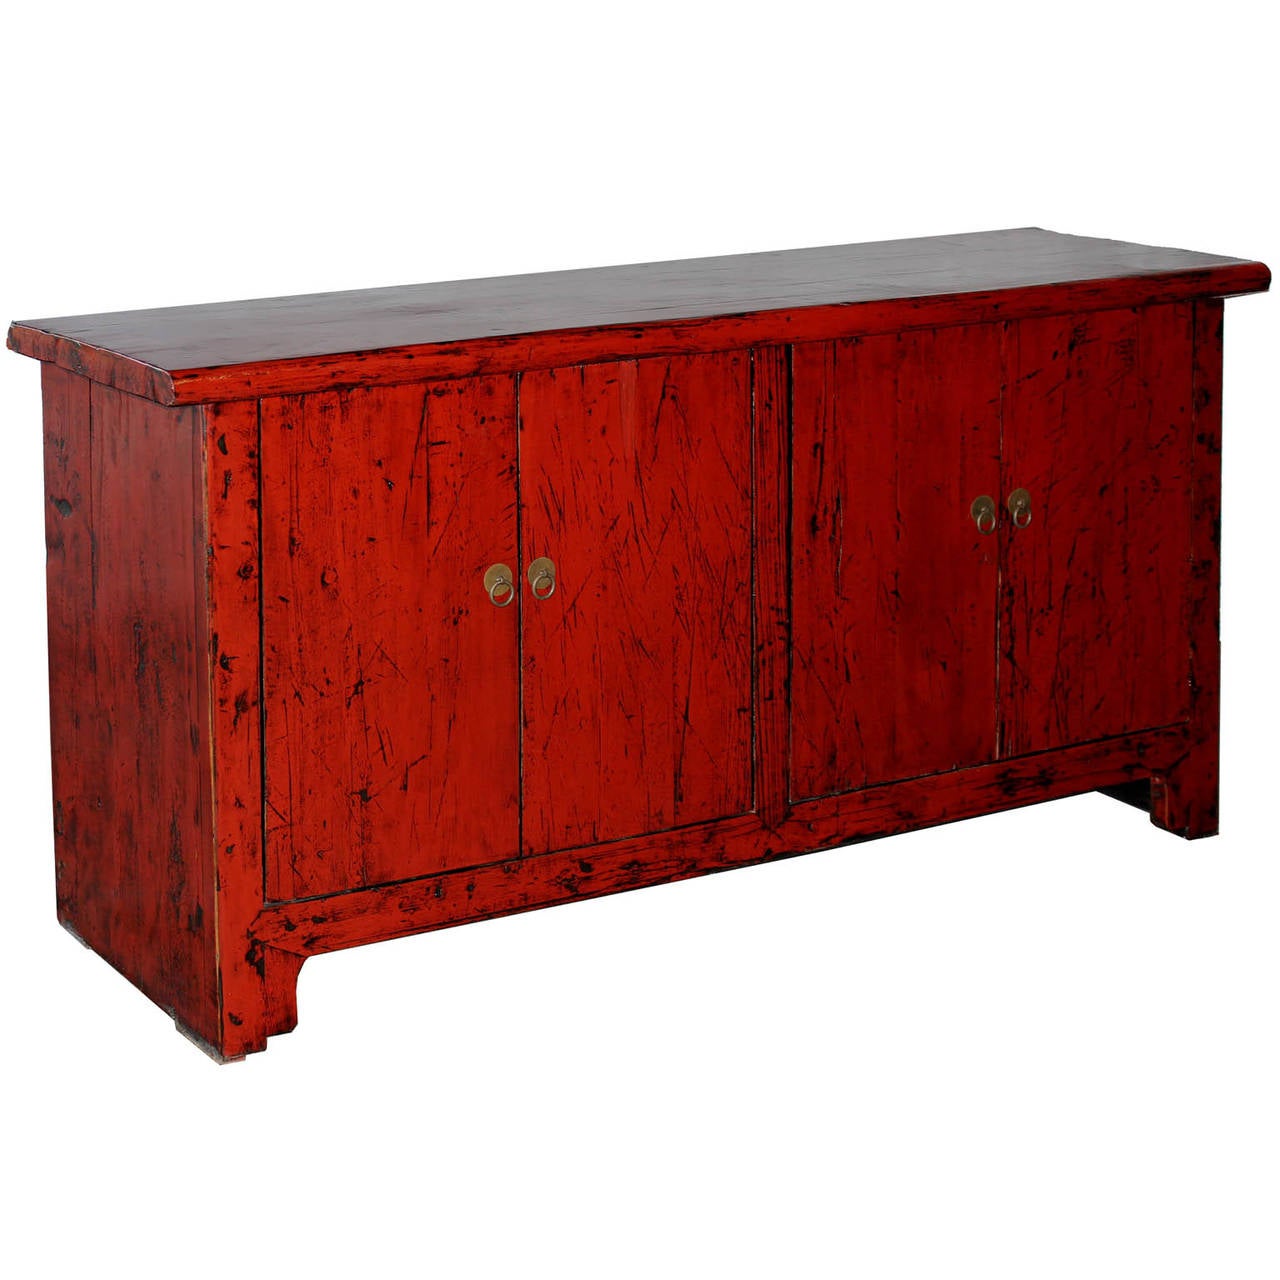 Four-door red lacquer elm buffet with over-hanging top from Shanxi, China. New interior shelf and hardware, circa 1890.